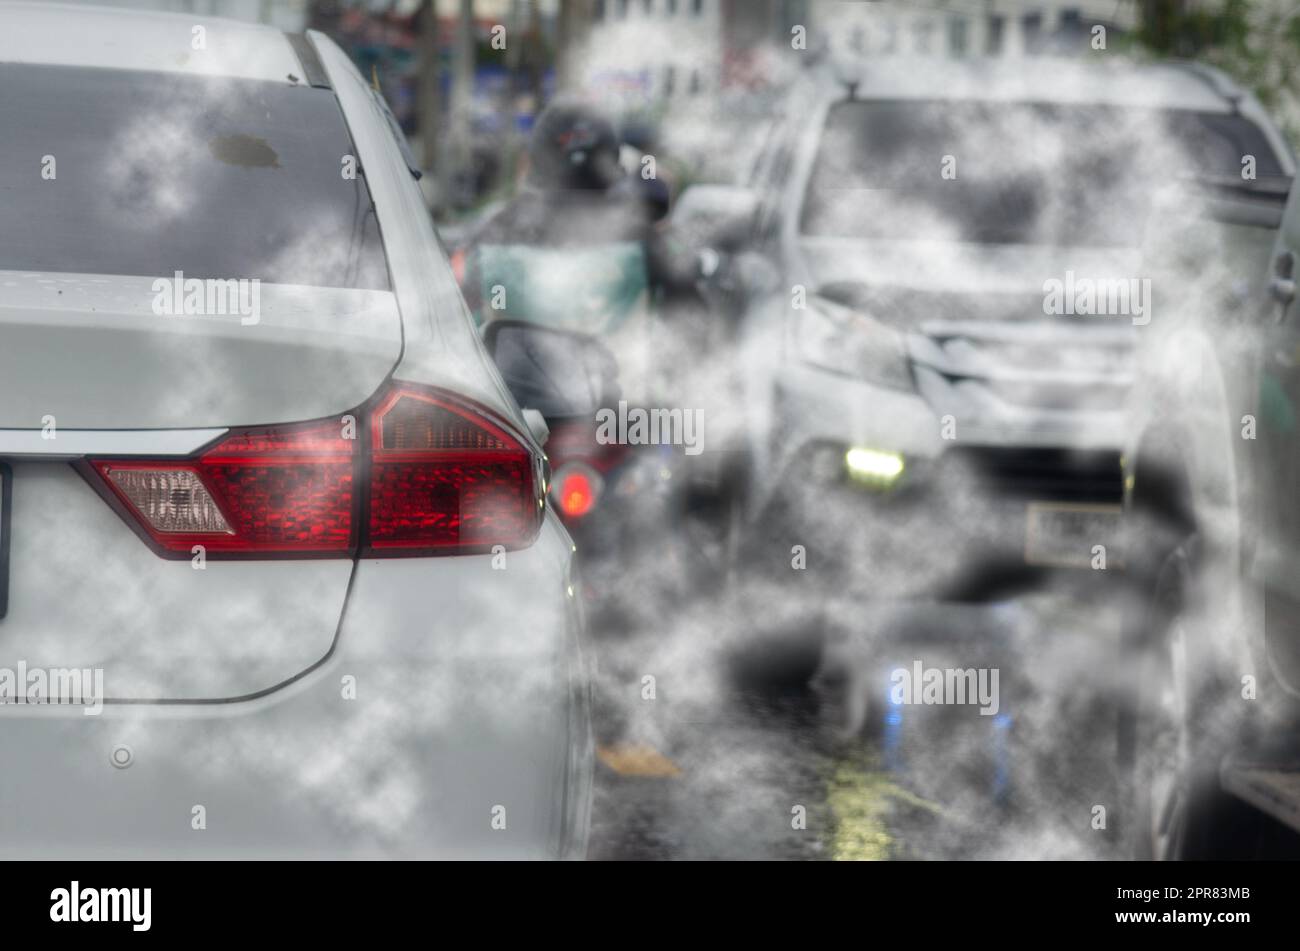 car pollution smoke exhaust automobile pollution traffic jam on road.Car emitting carbon dioxide causing air pollution. Stock Photo